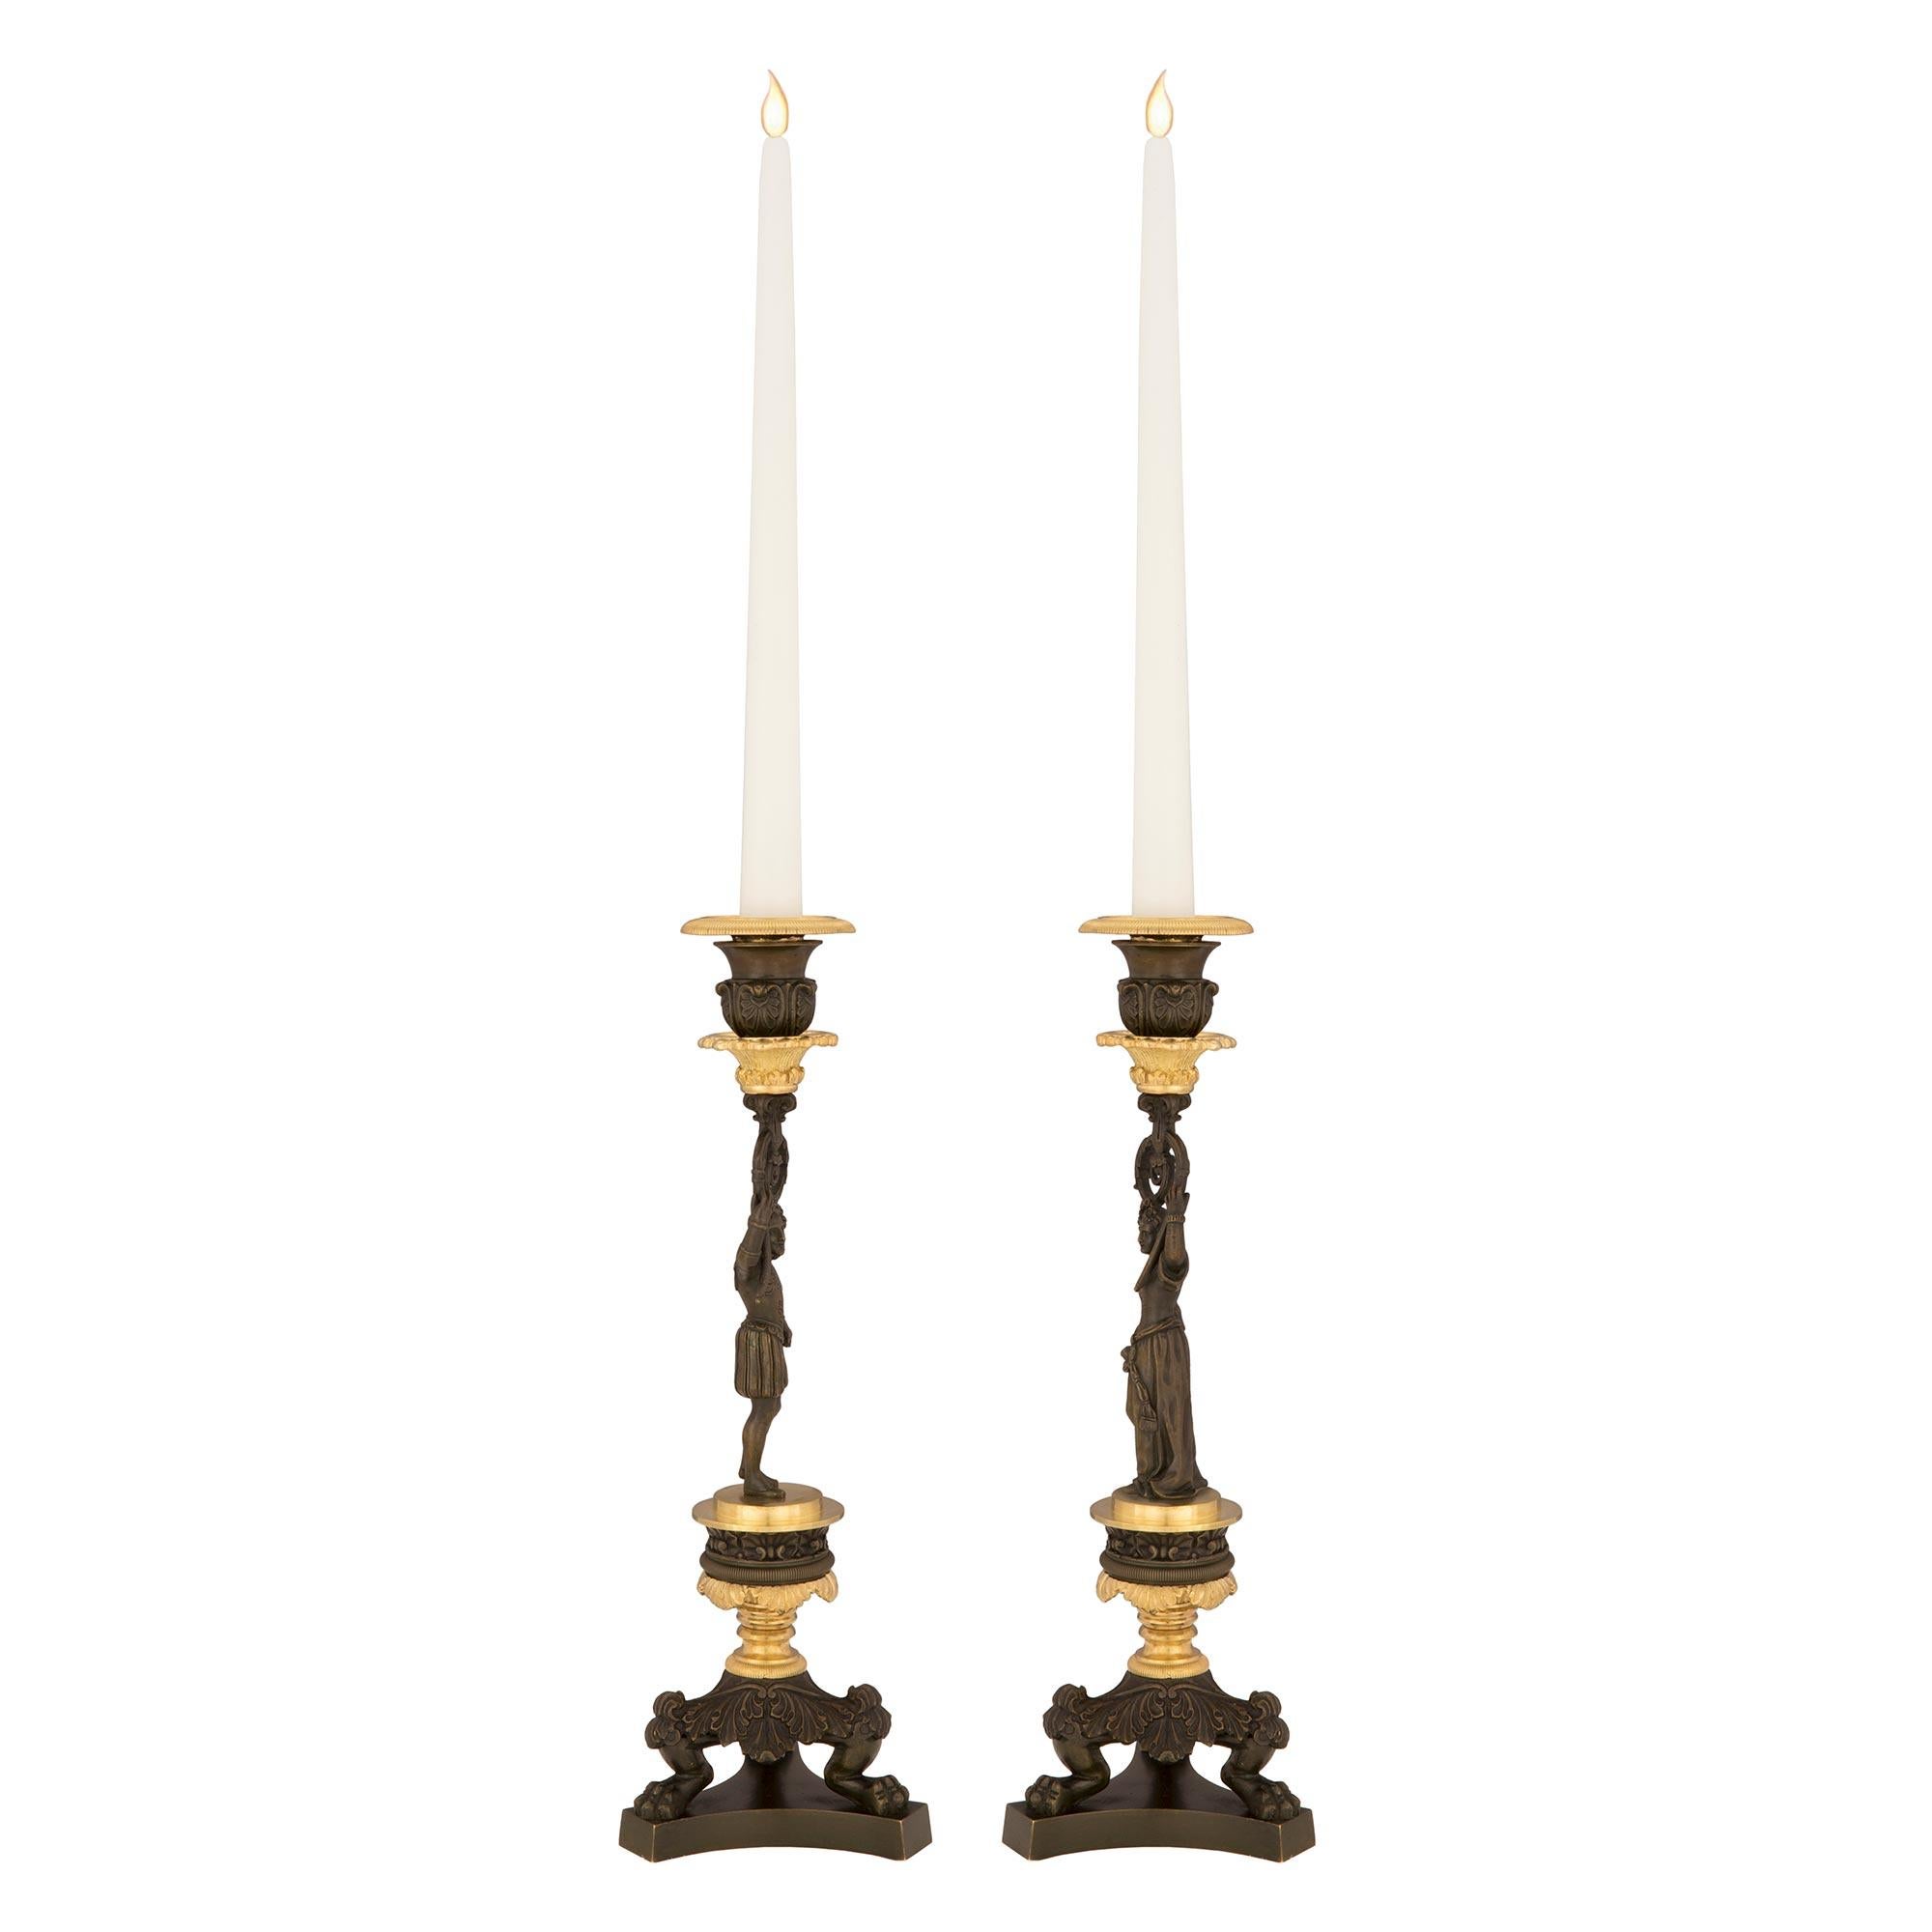 A striking pair of French 19th century Charles X st. patinated bronze and ormolu candlesticks. Each candlestick is raised by a triangular base with concave sides and handsome paw feet amidst acanthus leaves. Above, socle shaped supports and wrap